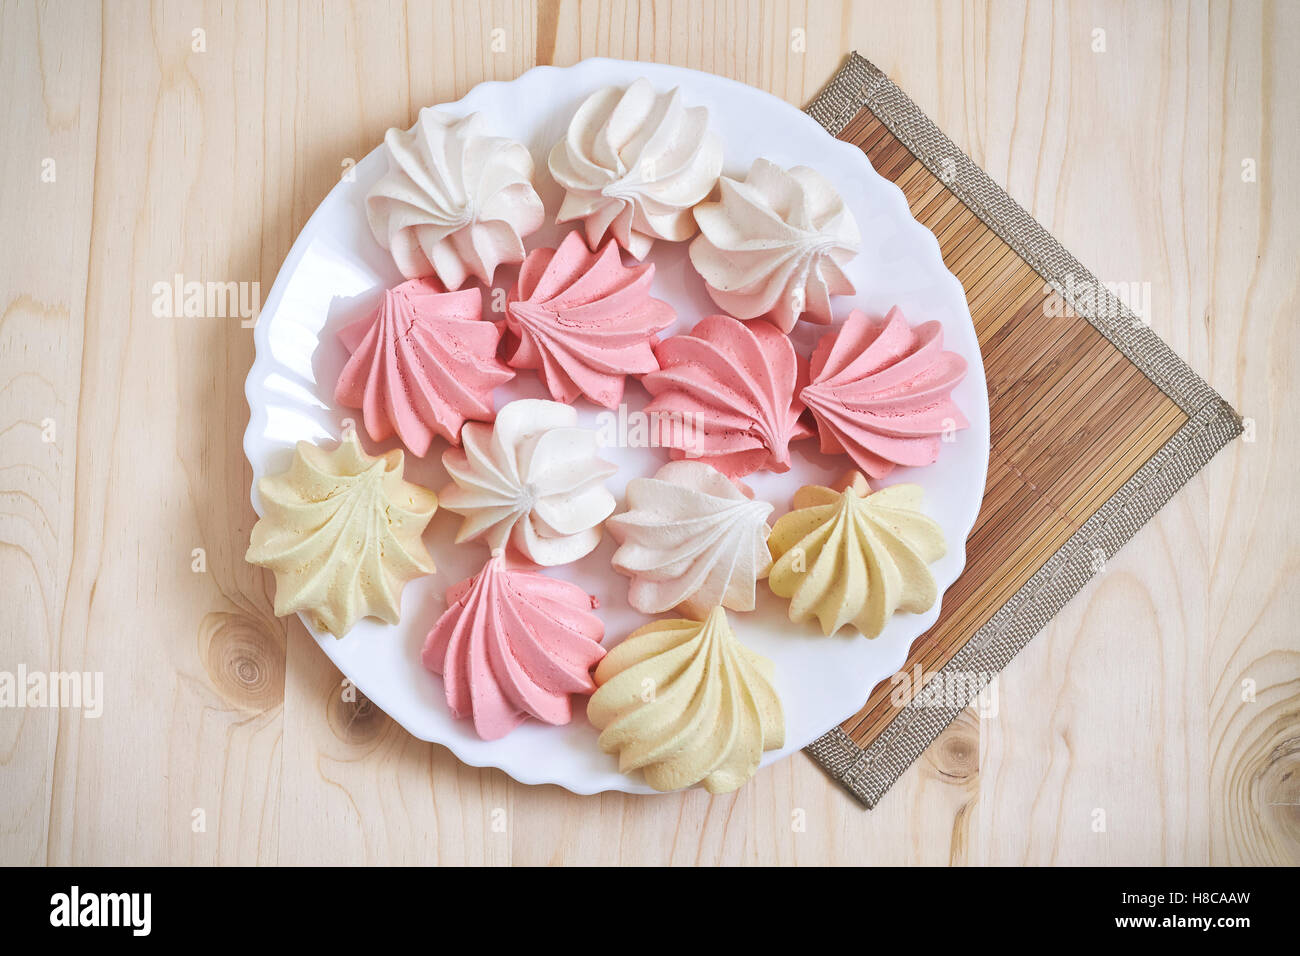 Fresh delicious colored meringue cookies on wooden table. Top view Stock Photo